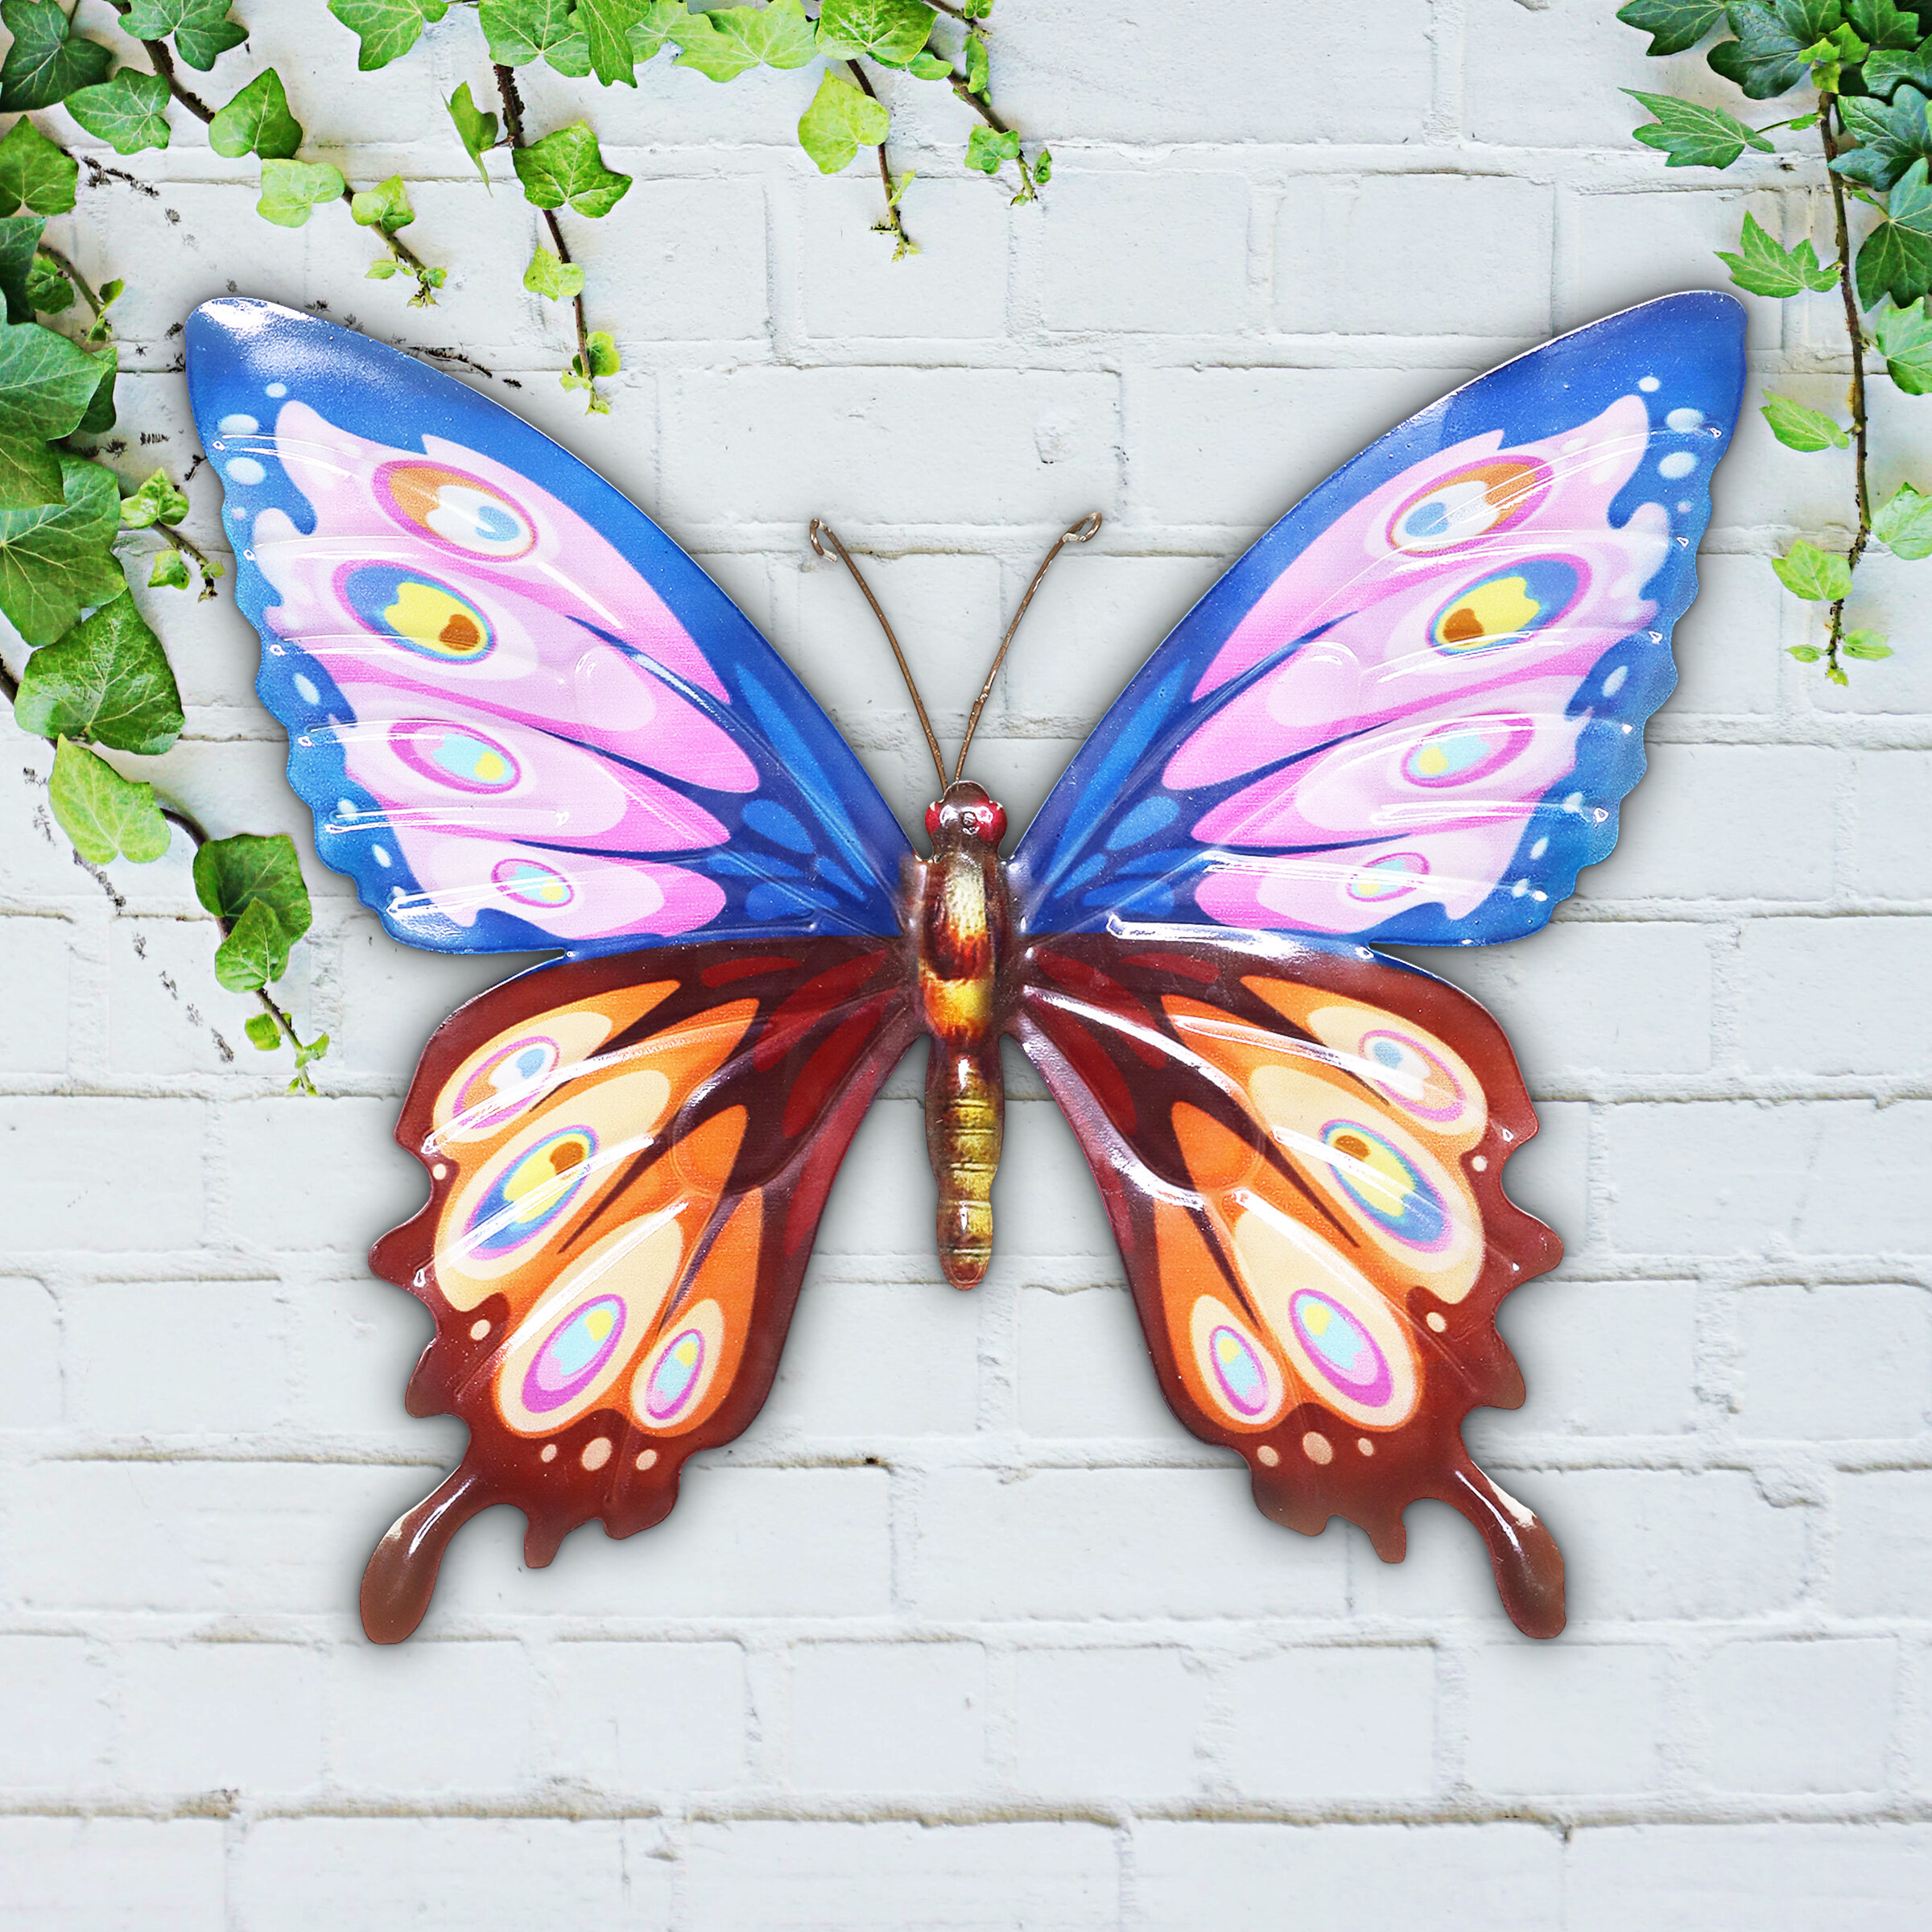 Asense Large Metal Butterfly Wall Art Decor Butterfly Hanging Decorative Wall Plaque Sculptures for Indoor Outdoor Garden